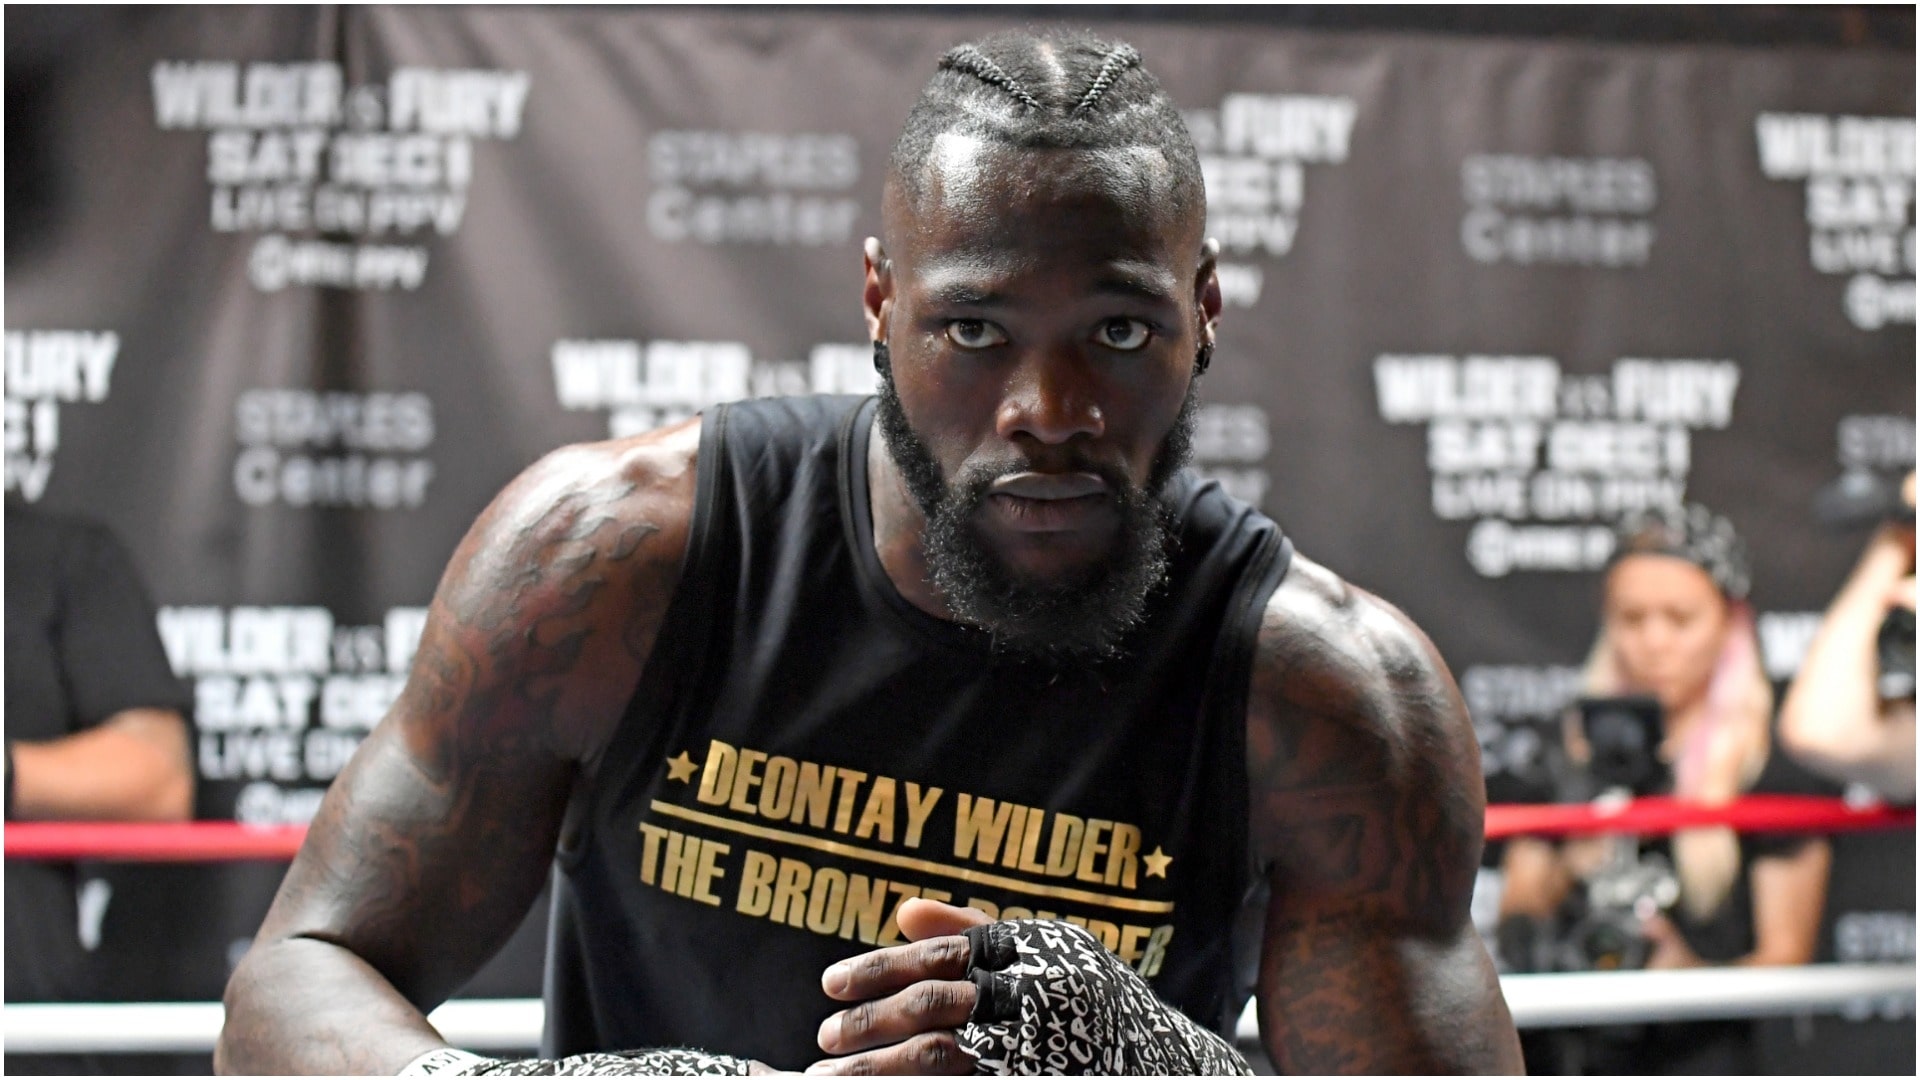 Deontay Wilder: I’m Going To KO Tyson Fury In Better Fashion In Rematch